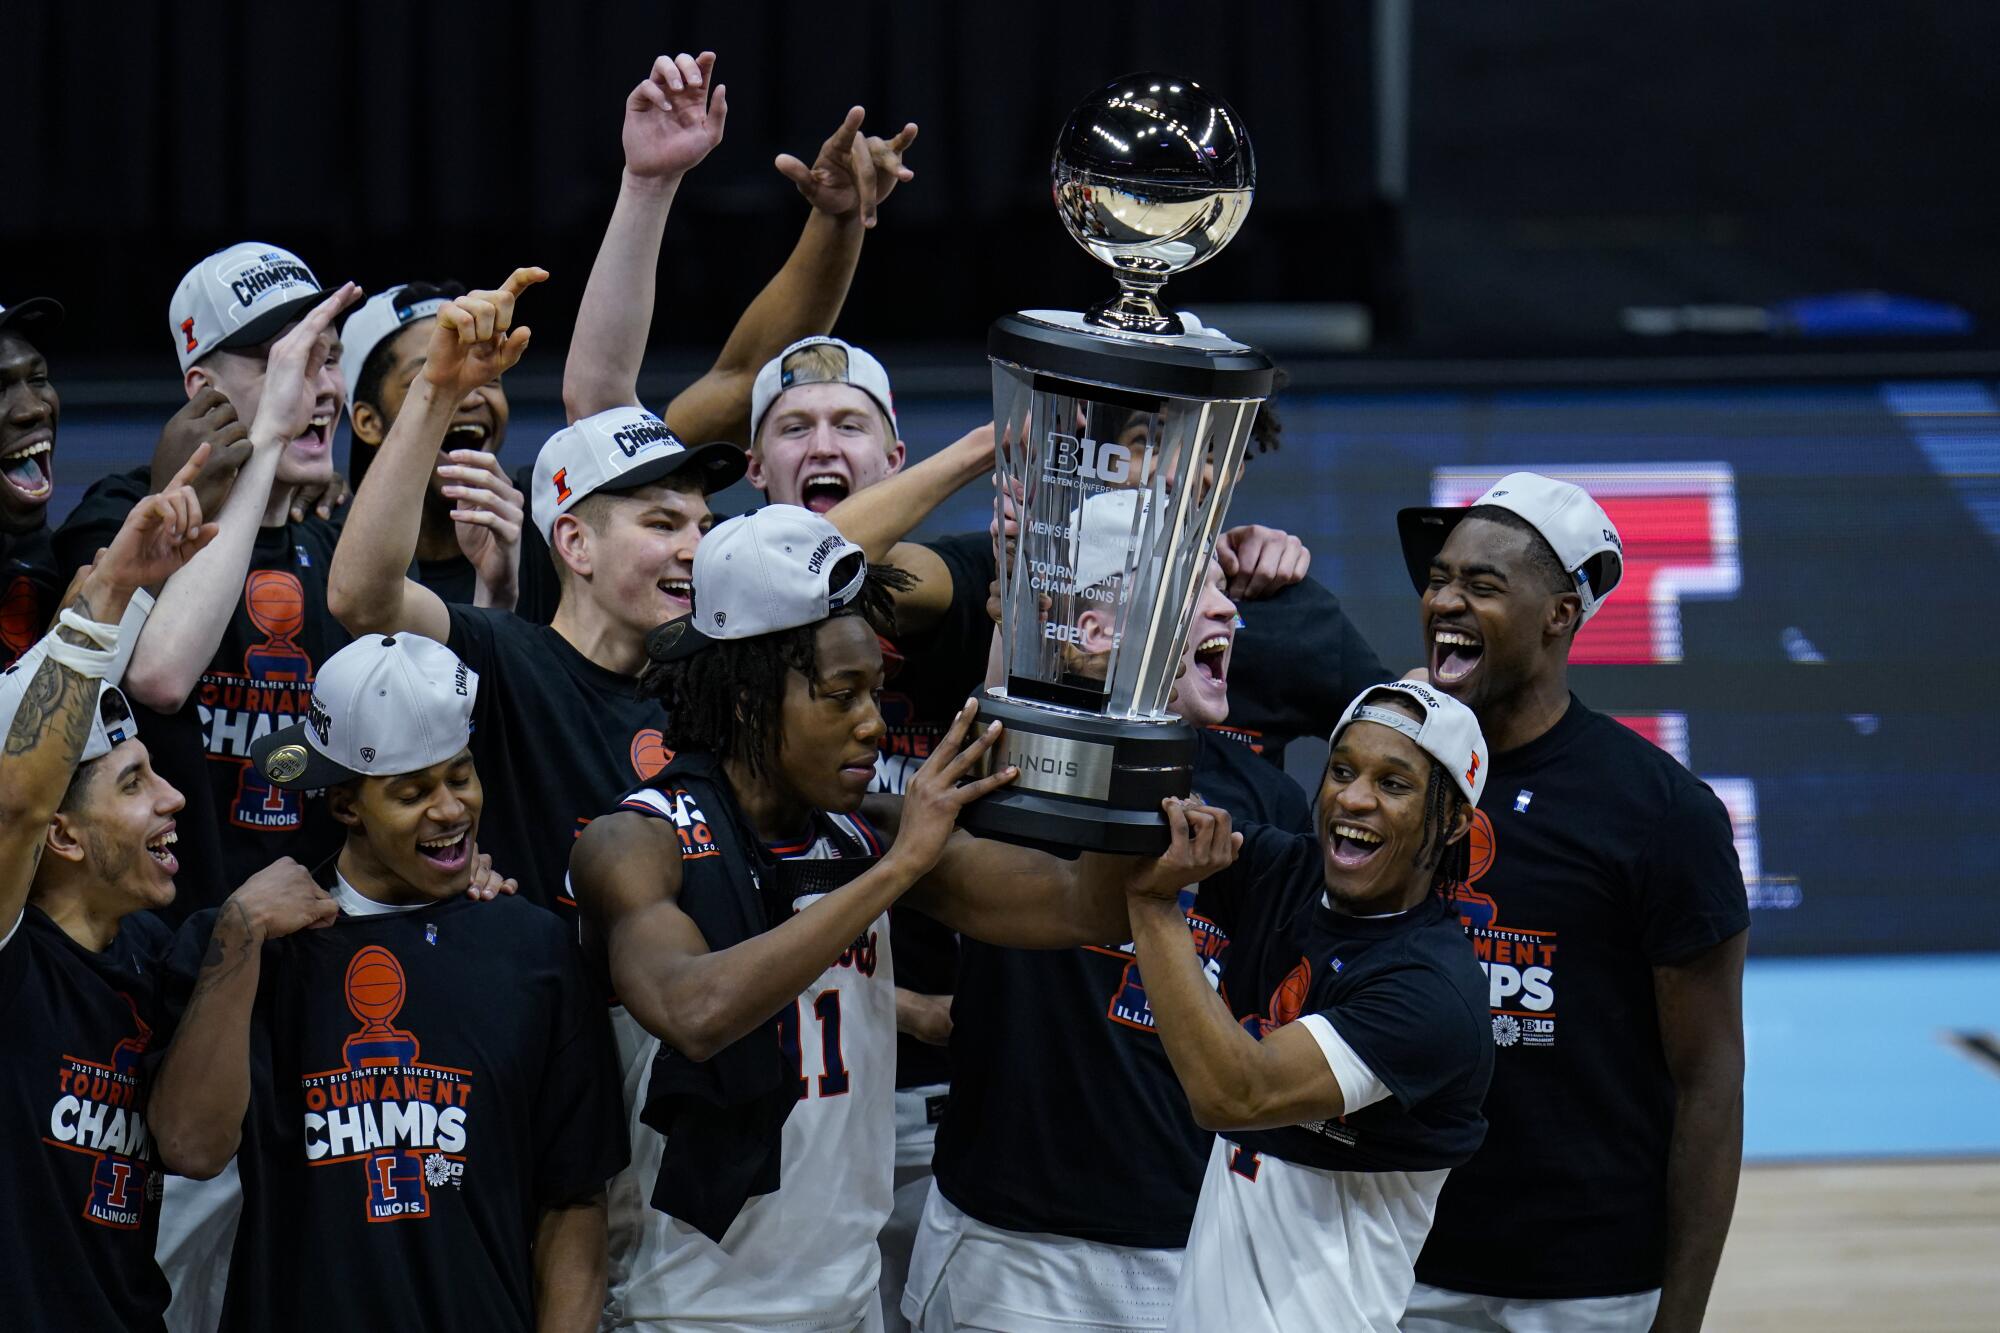 Illinois players celebrate after defeating Ohio State 91-88 in overtime to win the Big Ten tournament title Sunday.